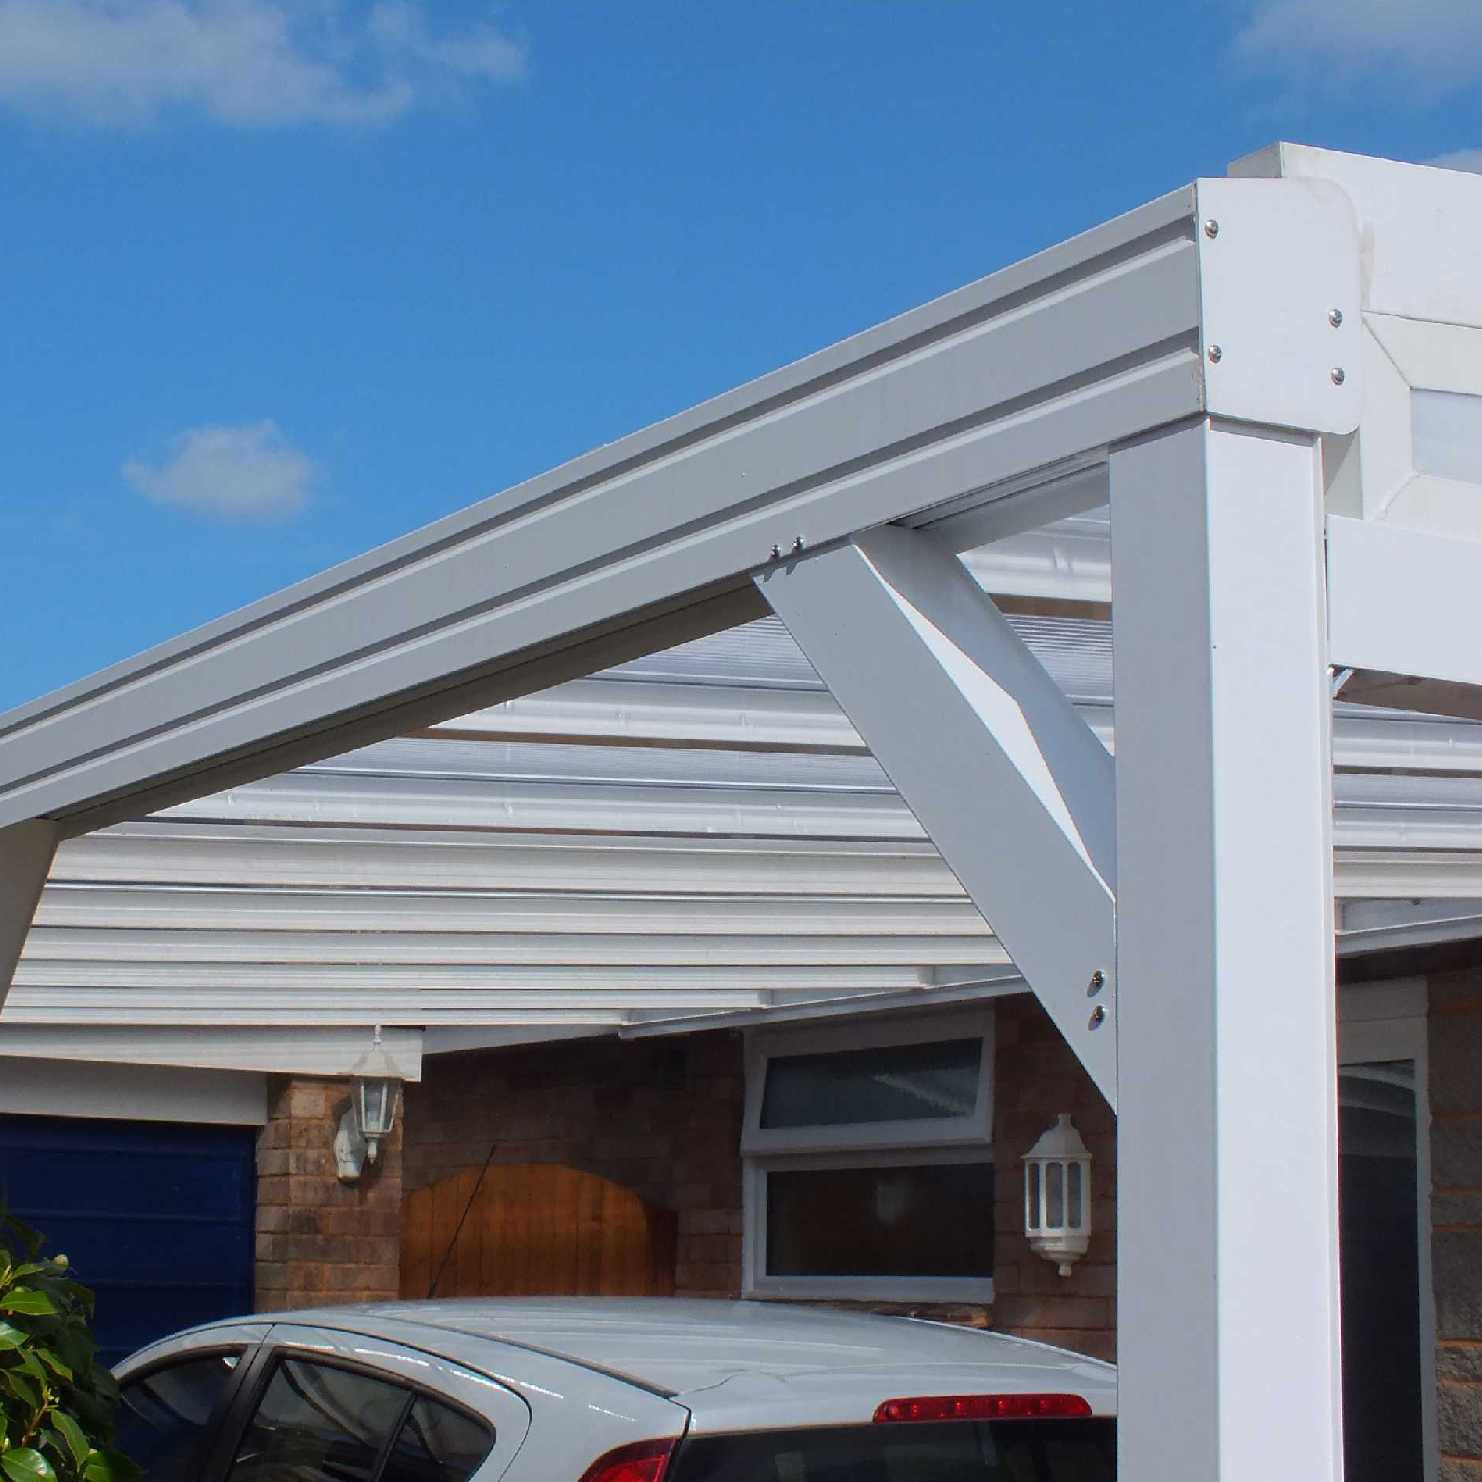 Buy Omega Smart Lean-To Canopy, White with 16mm Polycarbonate Glazing - 2.8m (W) x 3.5m (P), (2) Supporting Posts online today